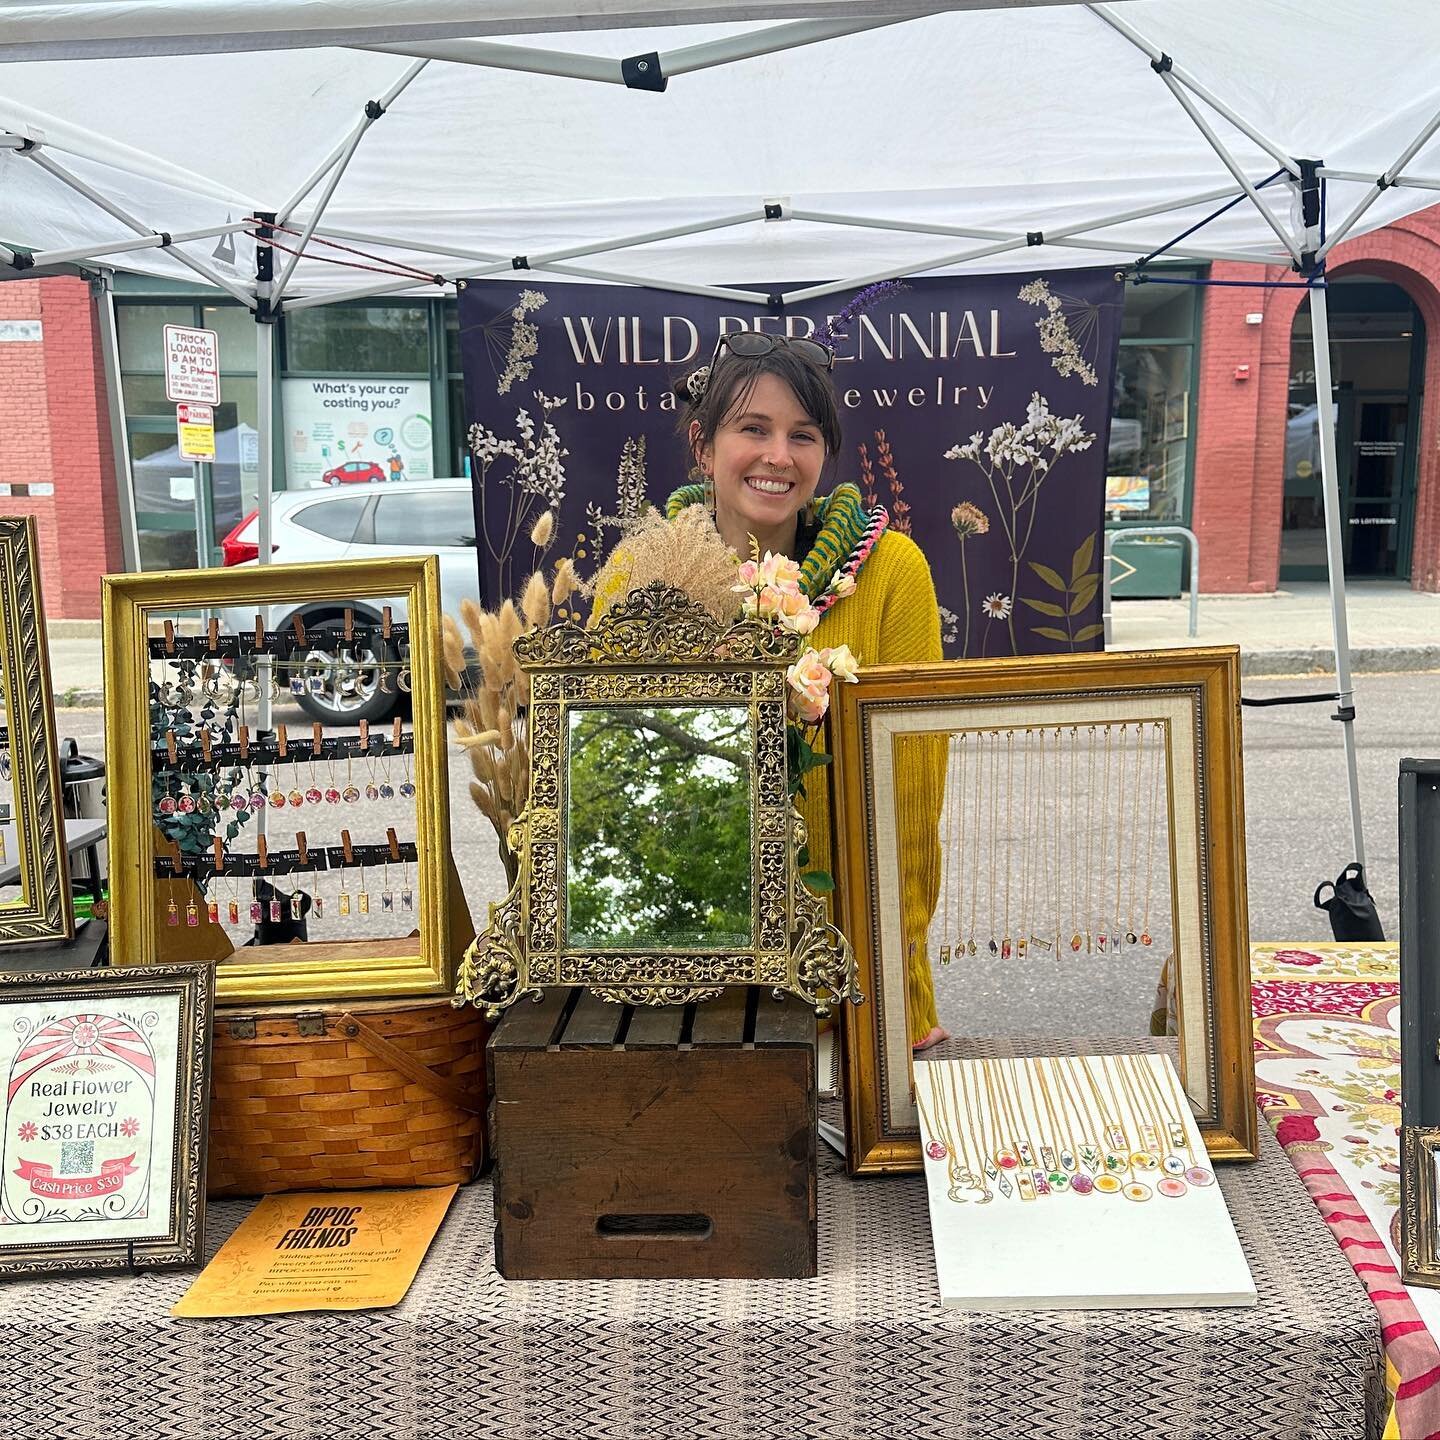 Happy market season! I'm so excited to see all your smiling faces this summer!
I'll be out slinging sweet sweet jewels every weekend until October so you have plenty of opportunities to come say hi!
Fridays: Richmond Farmers Market 3-6:30
Saturdays: 